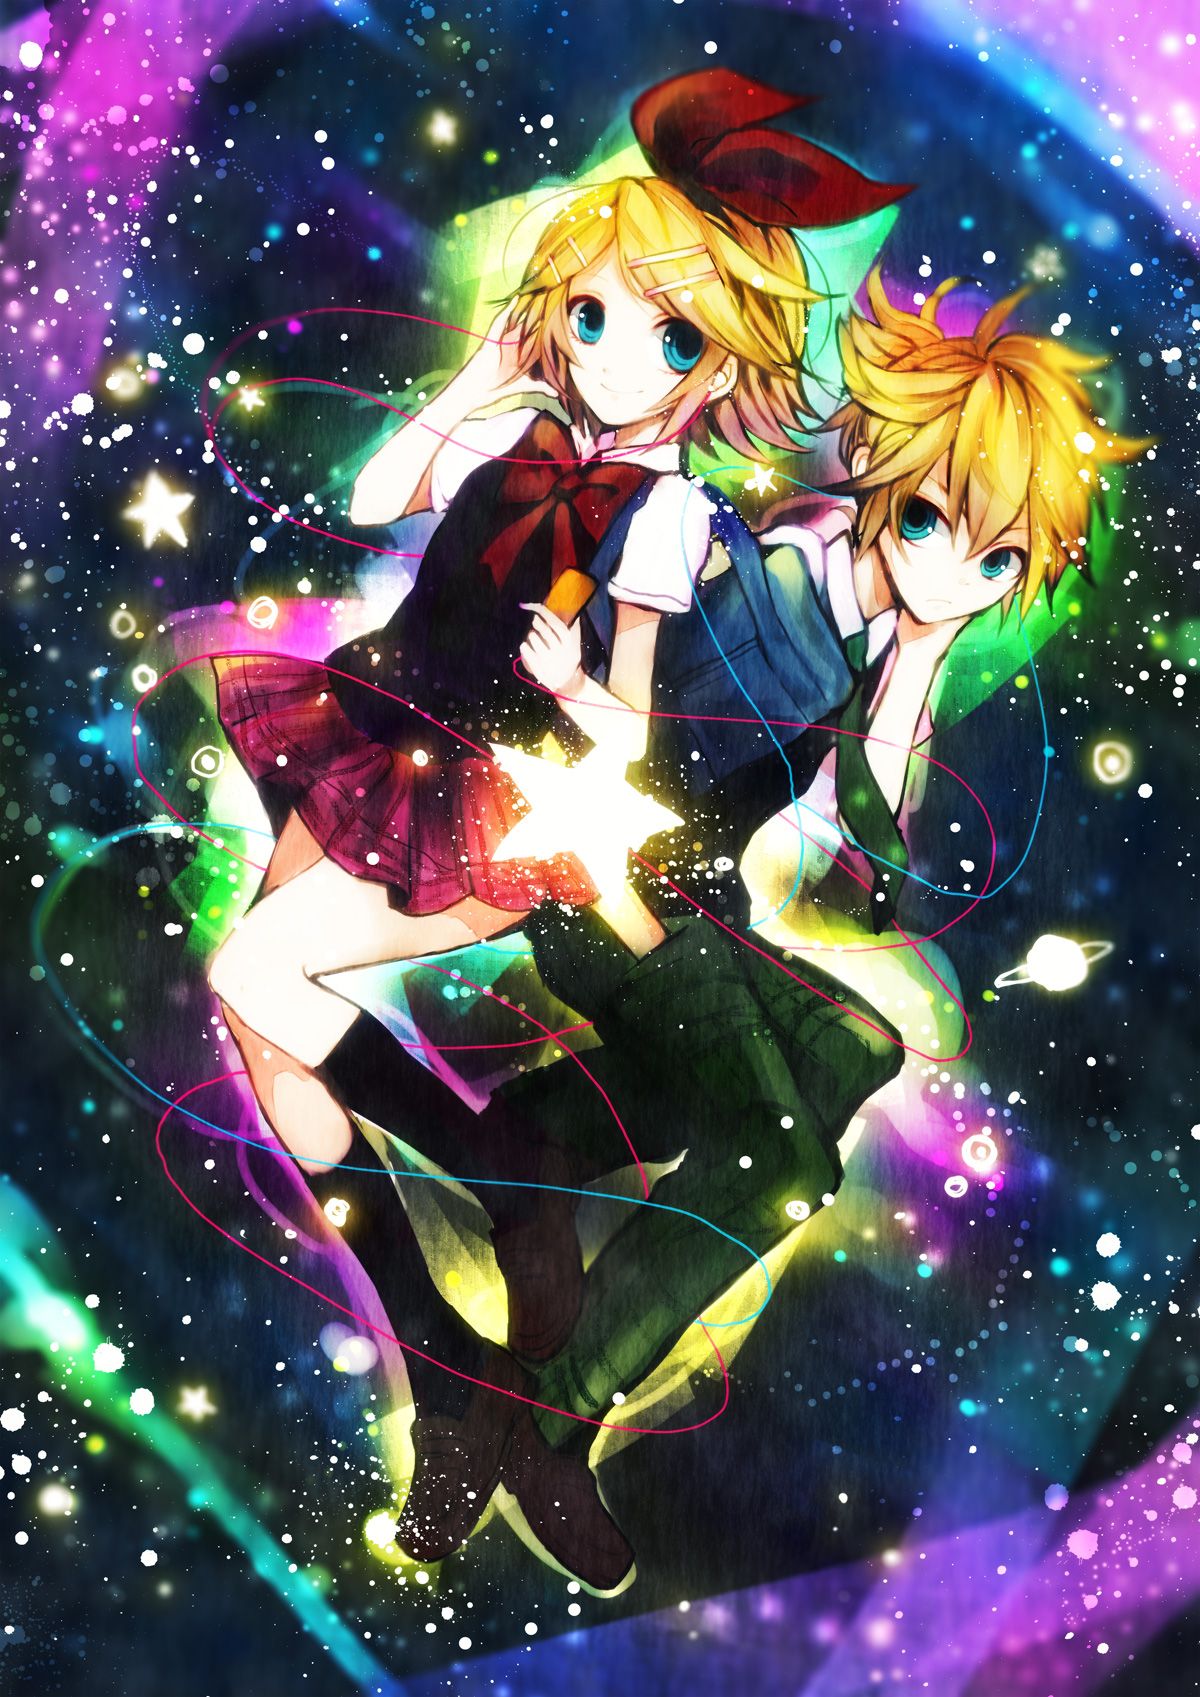 Two blonde twin girls with blue eyes, one dressed in a school uniform and the other in a dress, float in space with a colorful nebula behind them - 